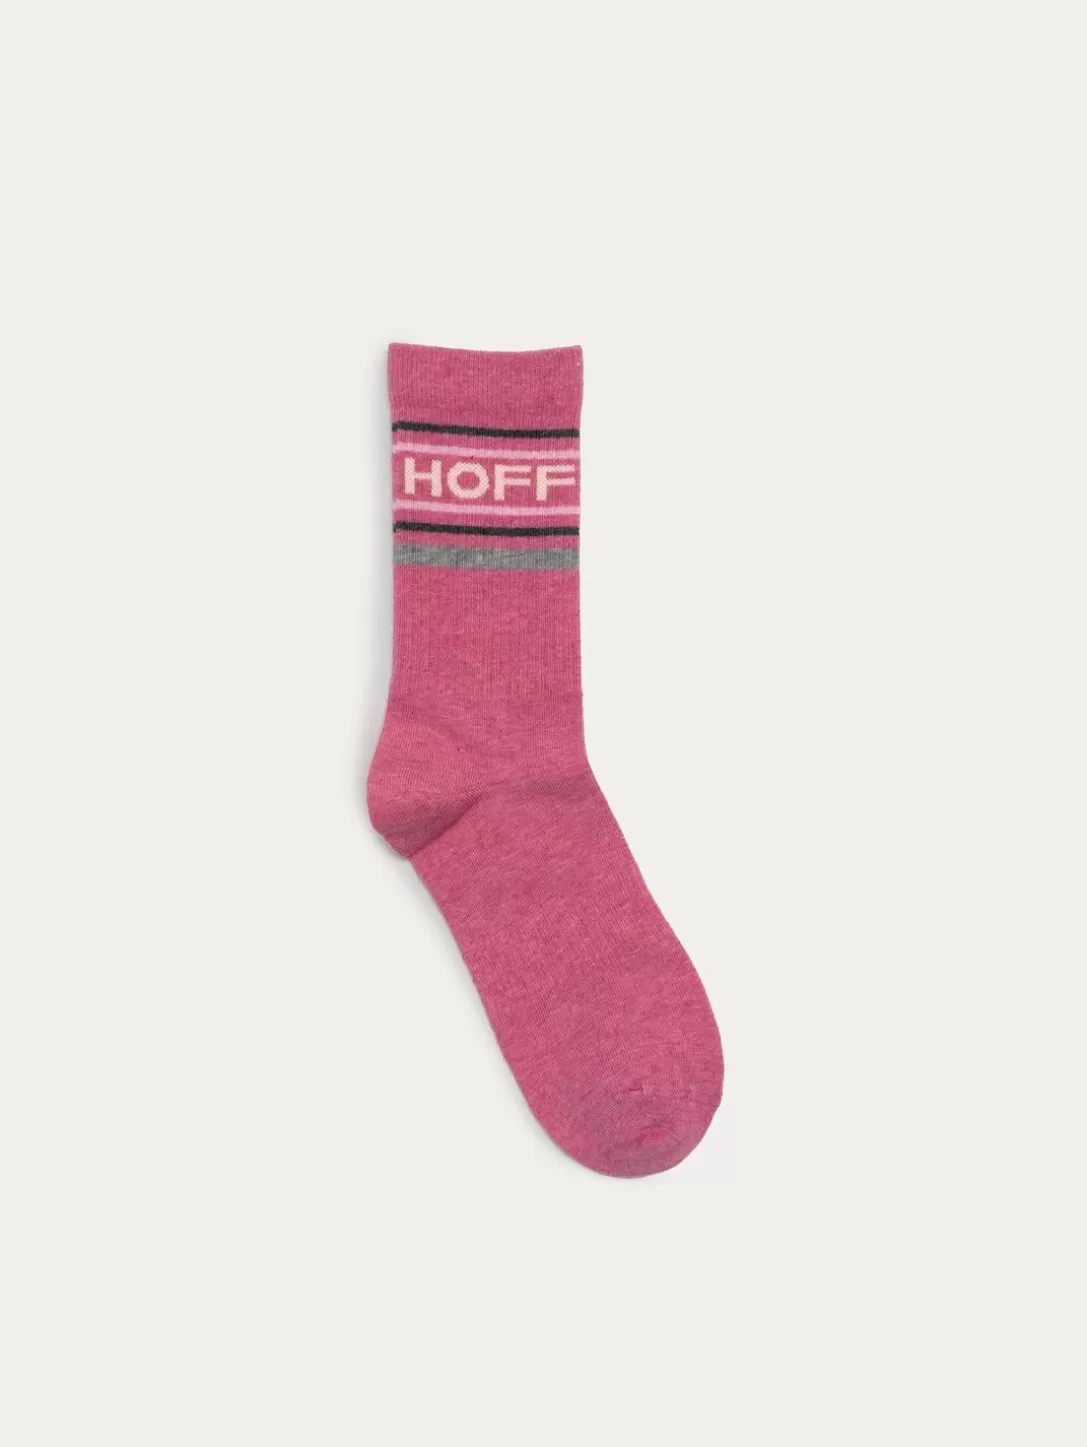 HOFF Pink Socks - Breast Cancer Day Store